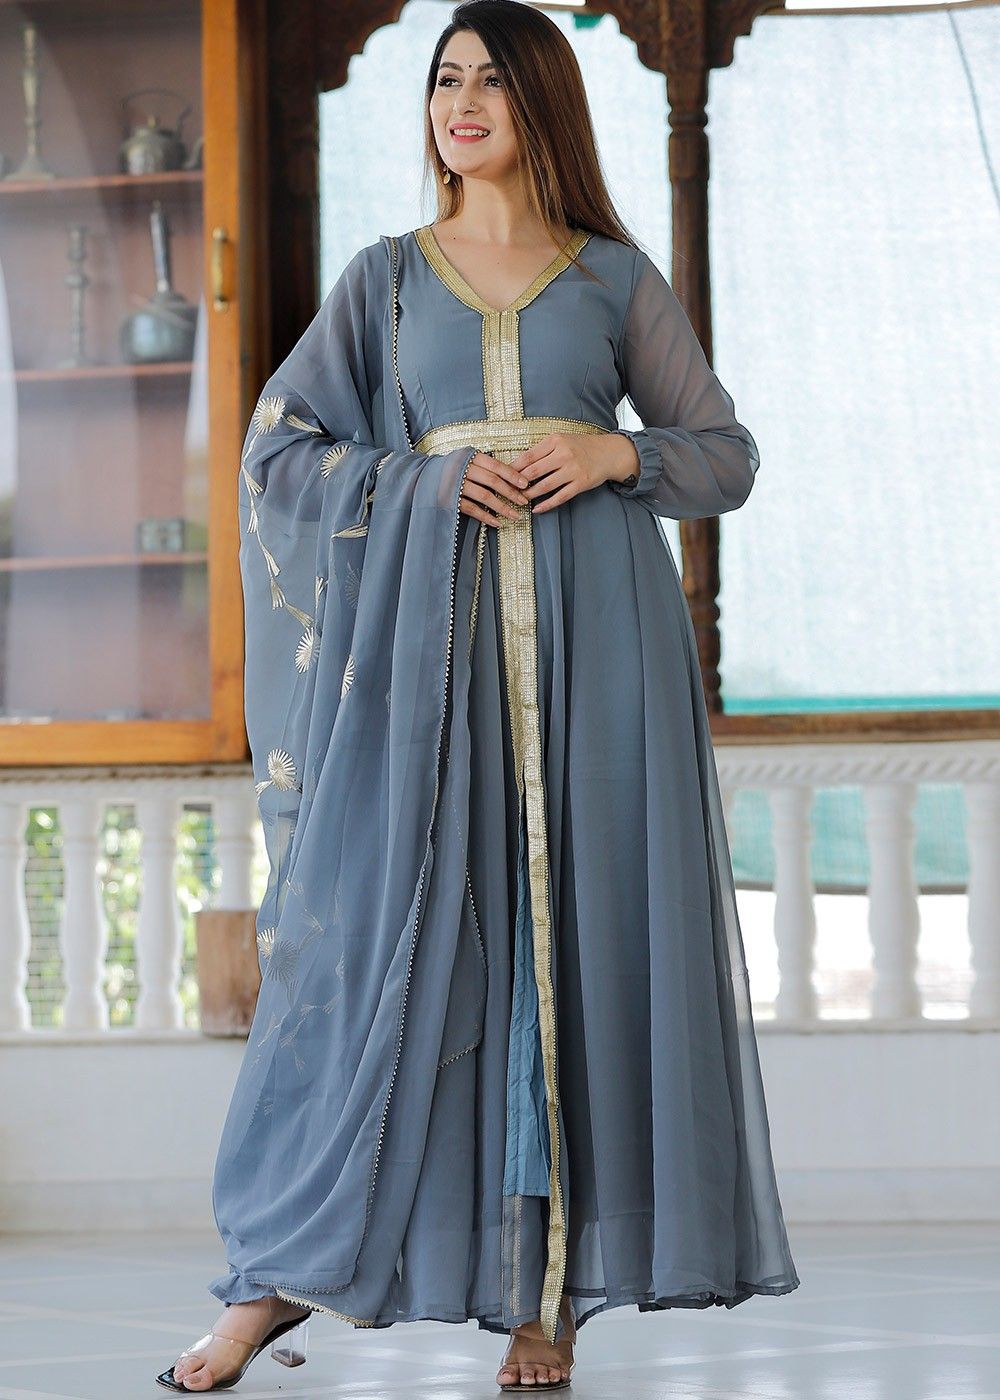 Aggregate more than 79 blue grey layered georgette kurti best